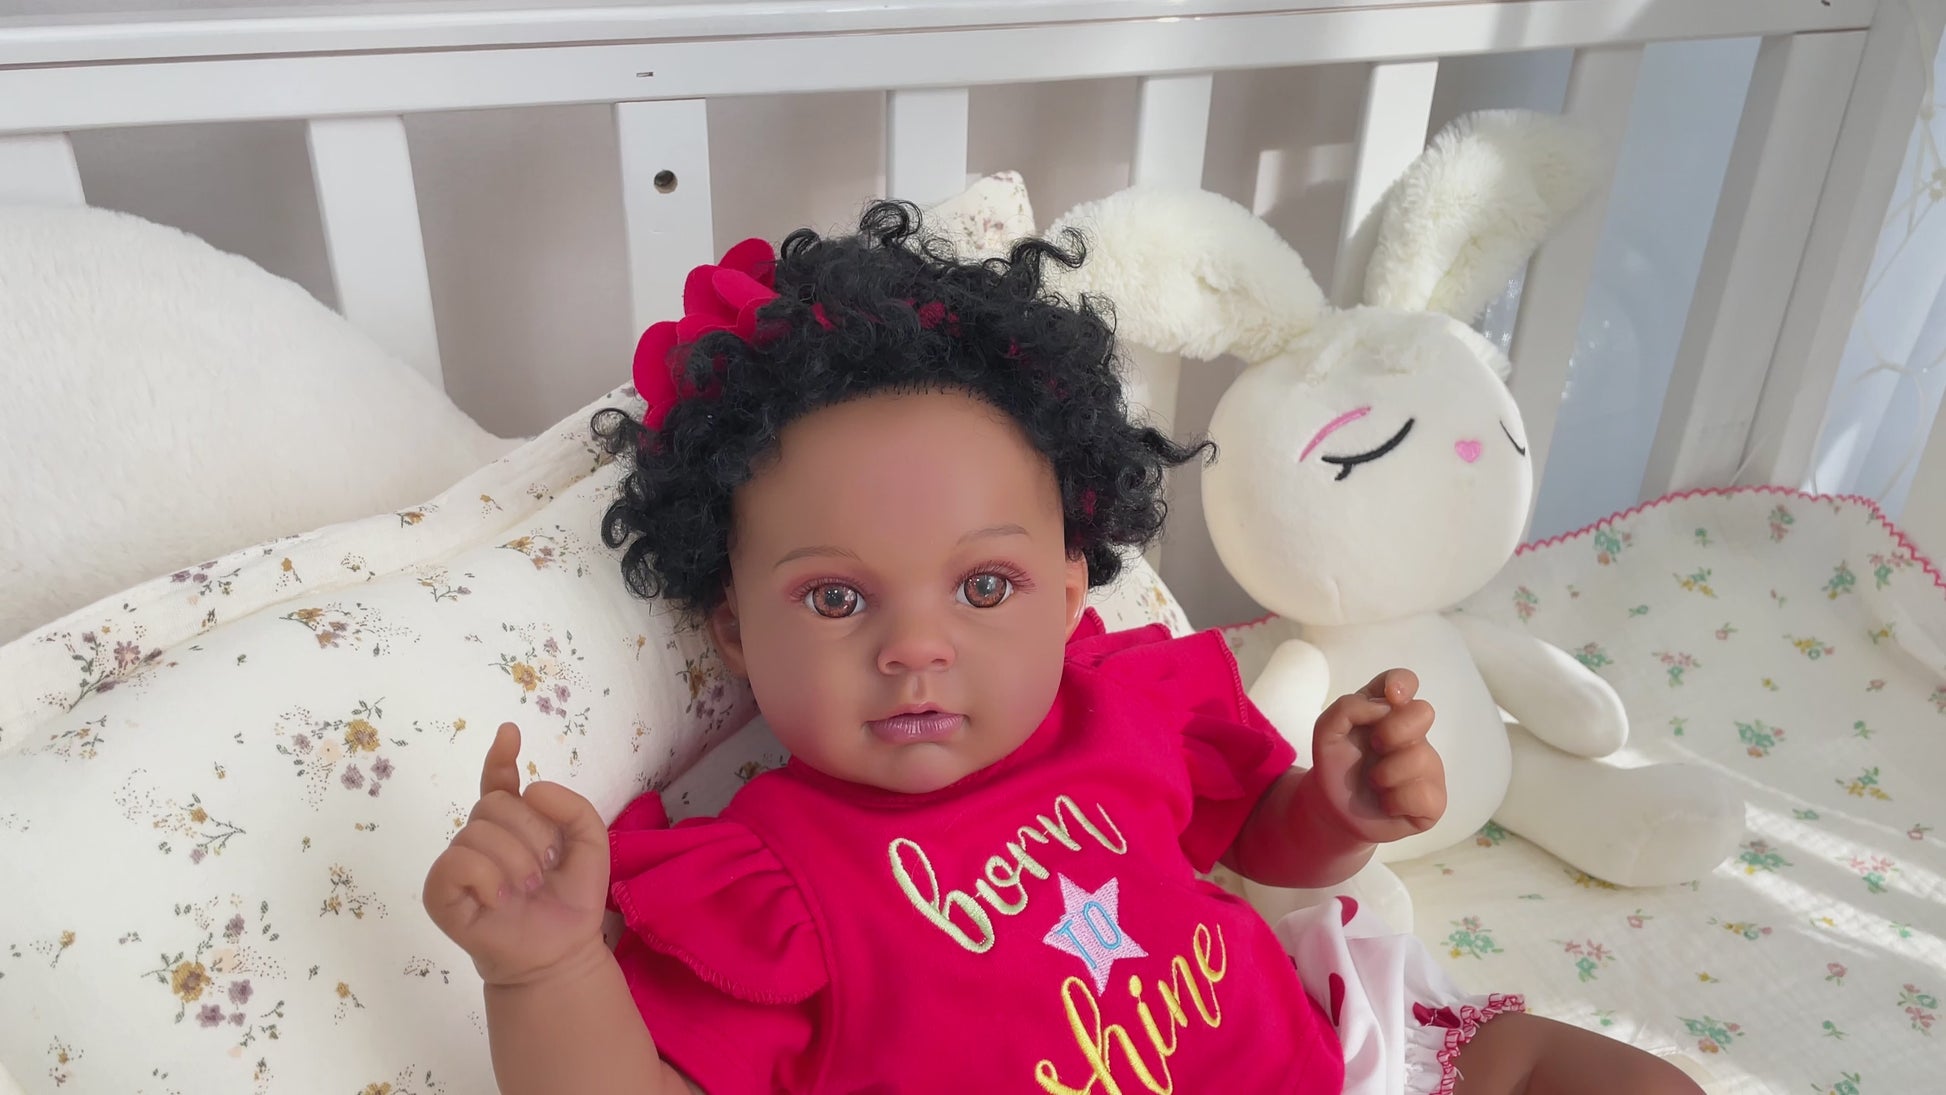 Perfect gift for kids and your family, choose Kaydora Lifelike Baby doll_ Nala. She can accompany your kids to do role-play activities and accompany the elderly.